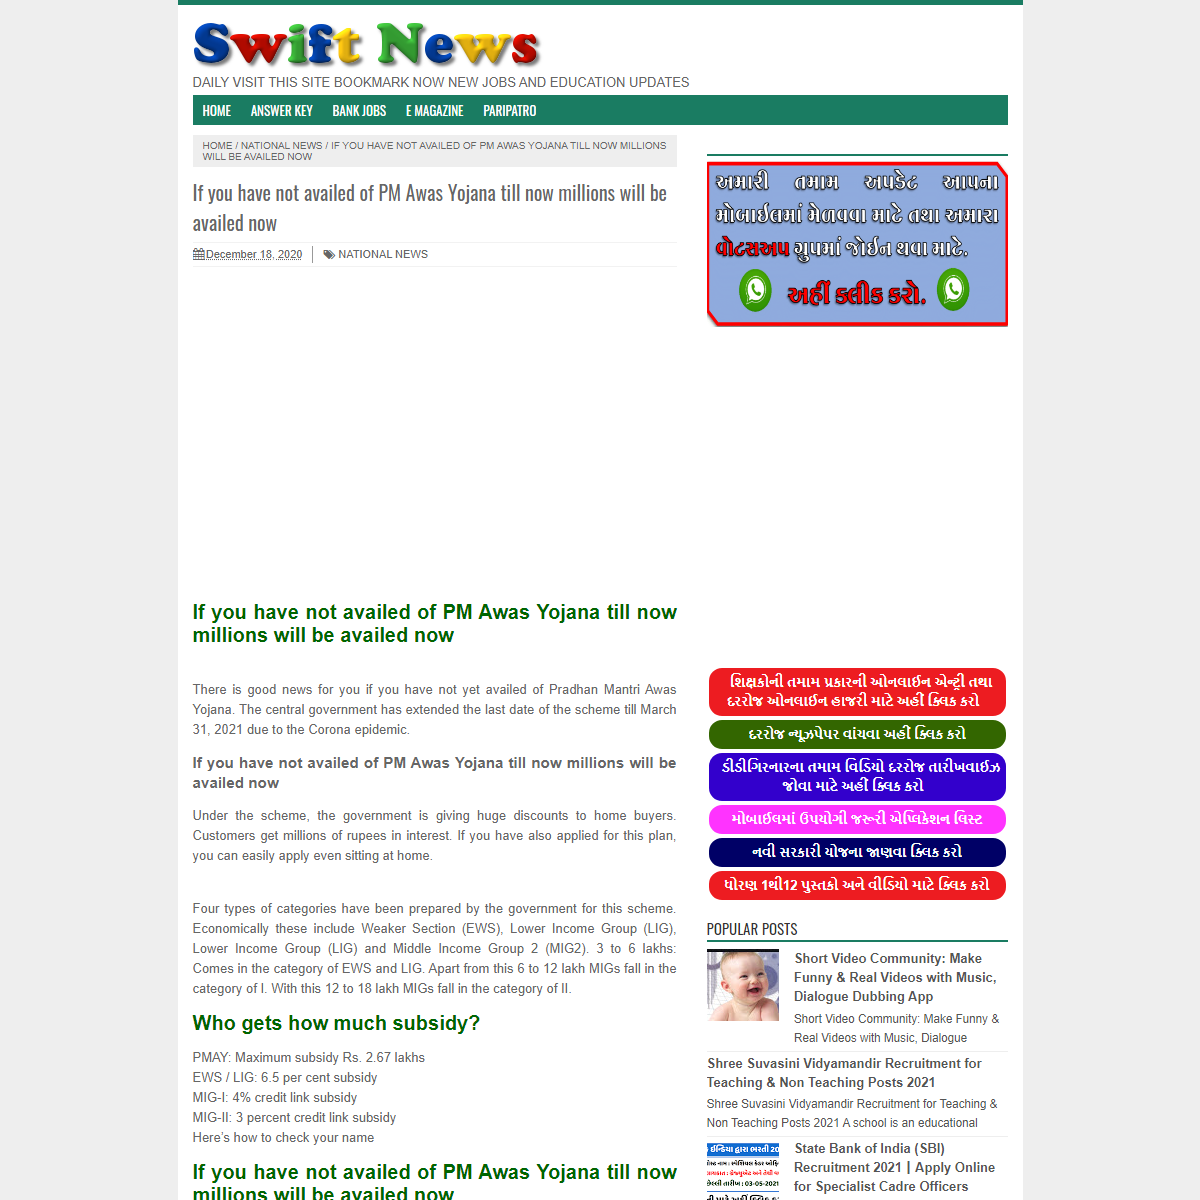 A complete backup of https://www.swiftnews.co.in/2020/12/if-you-have-not-availed-of-pm-awas.html